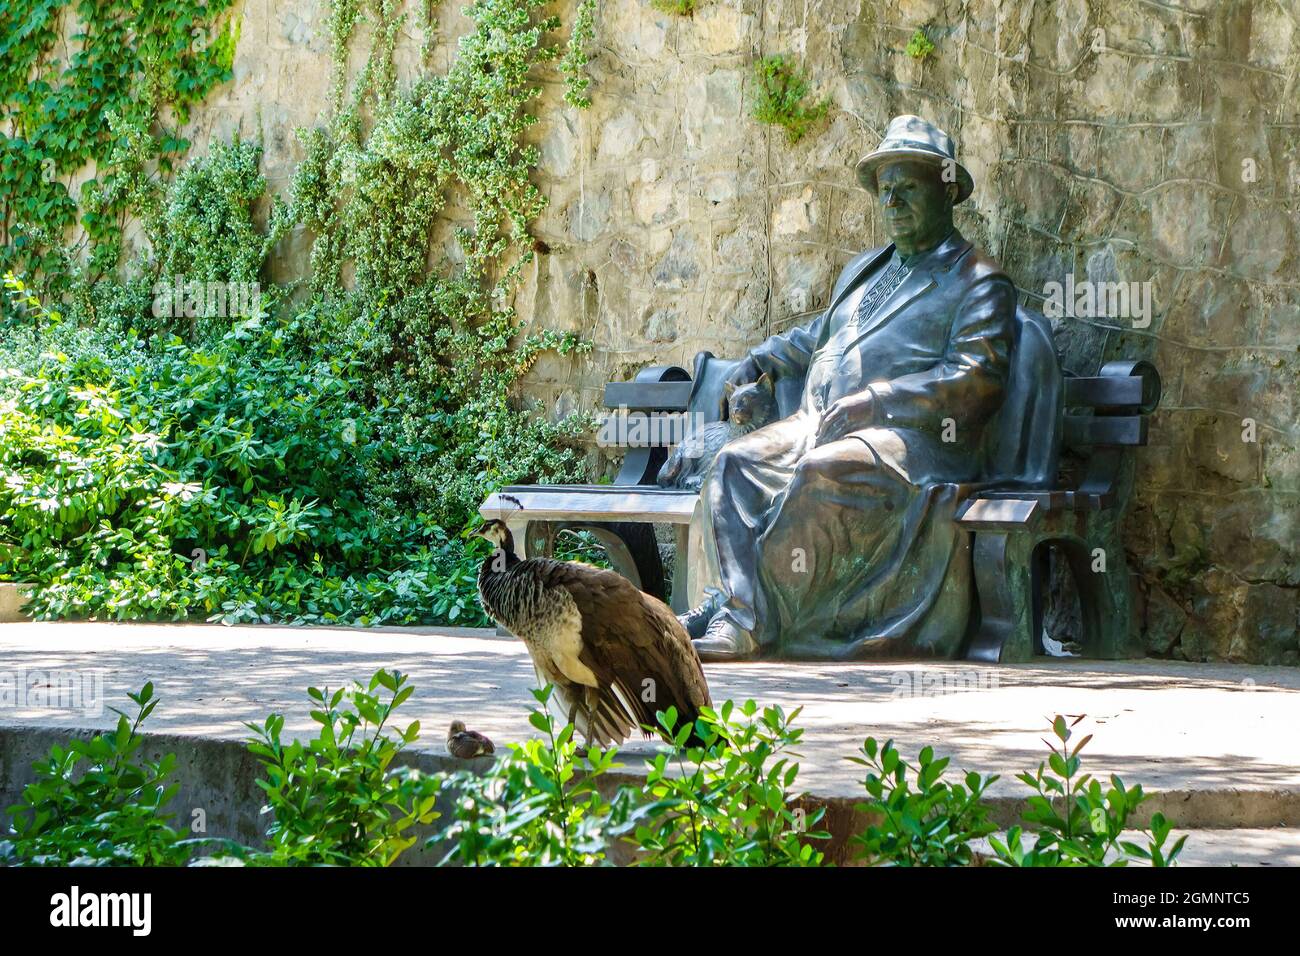 Statue of former Soviet leader Nikita Khrushchev with cat sitting on bench. It seems as if statue looking at walking birds - female peacock & her chic Stock Photo